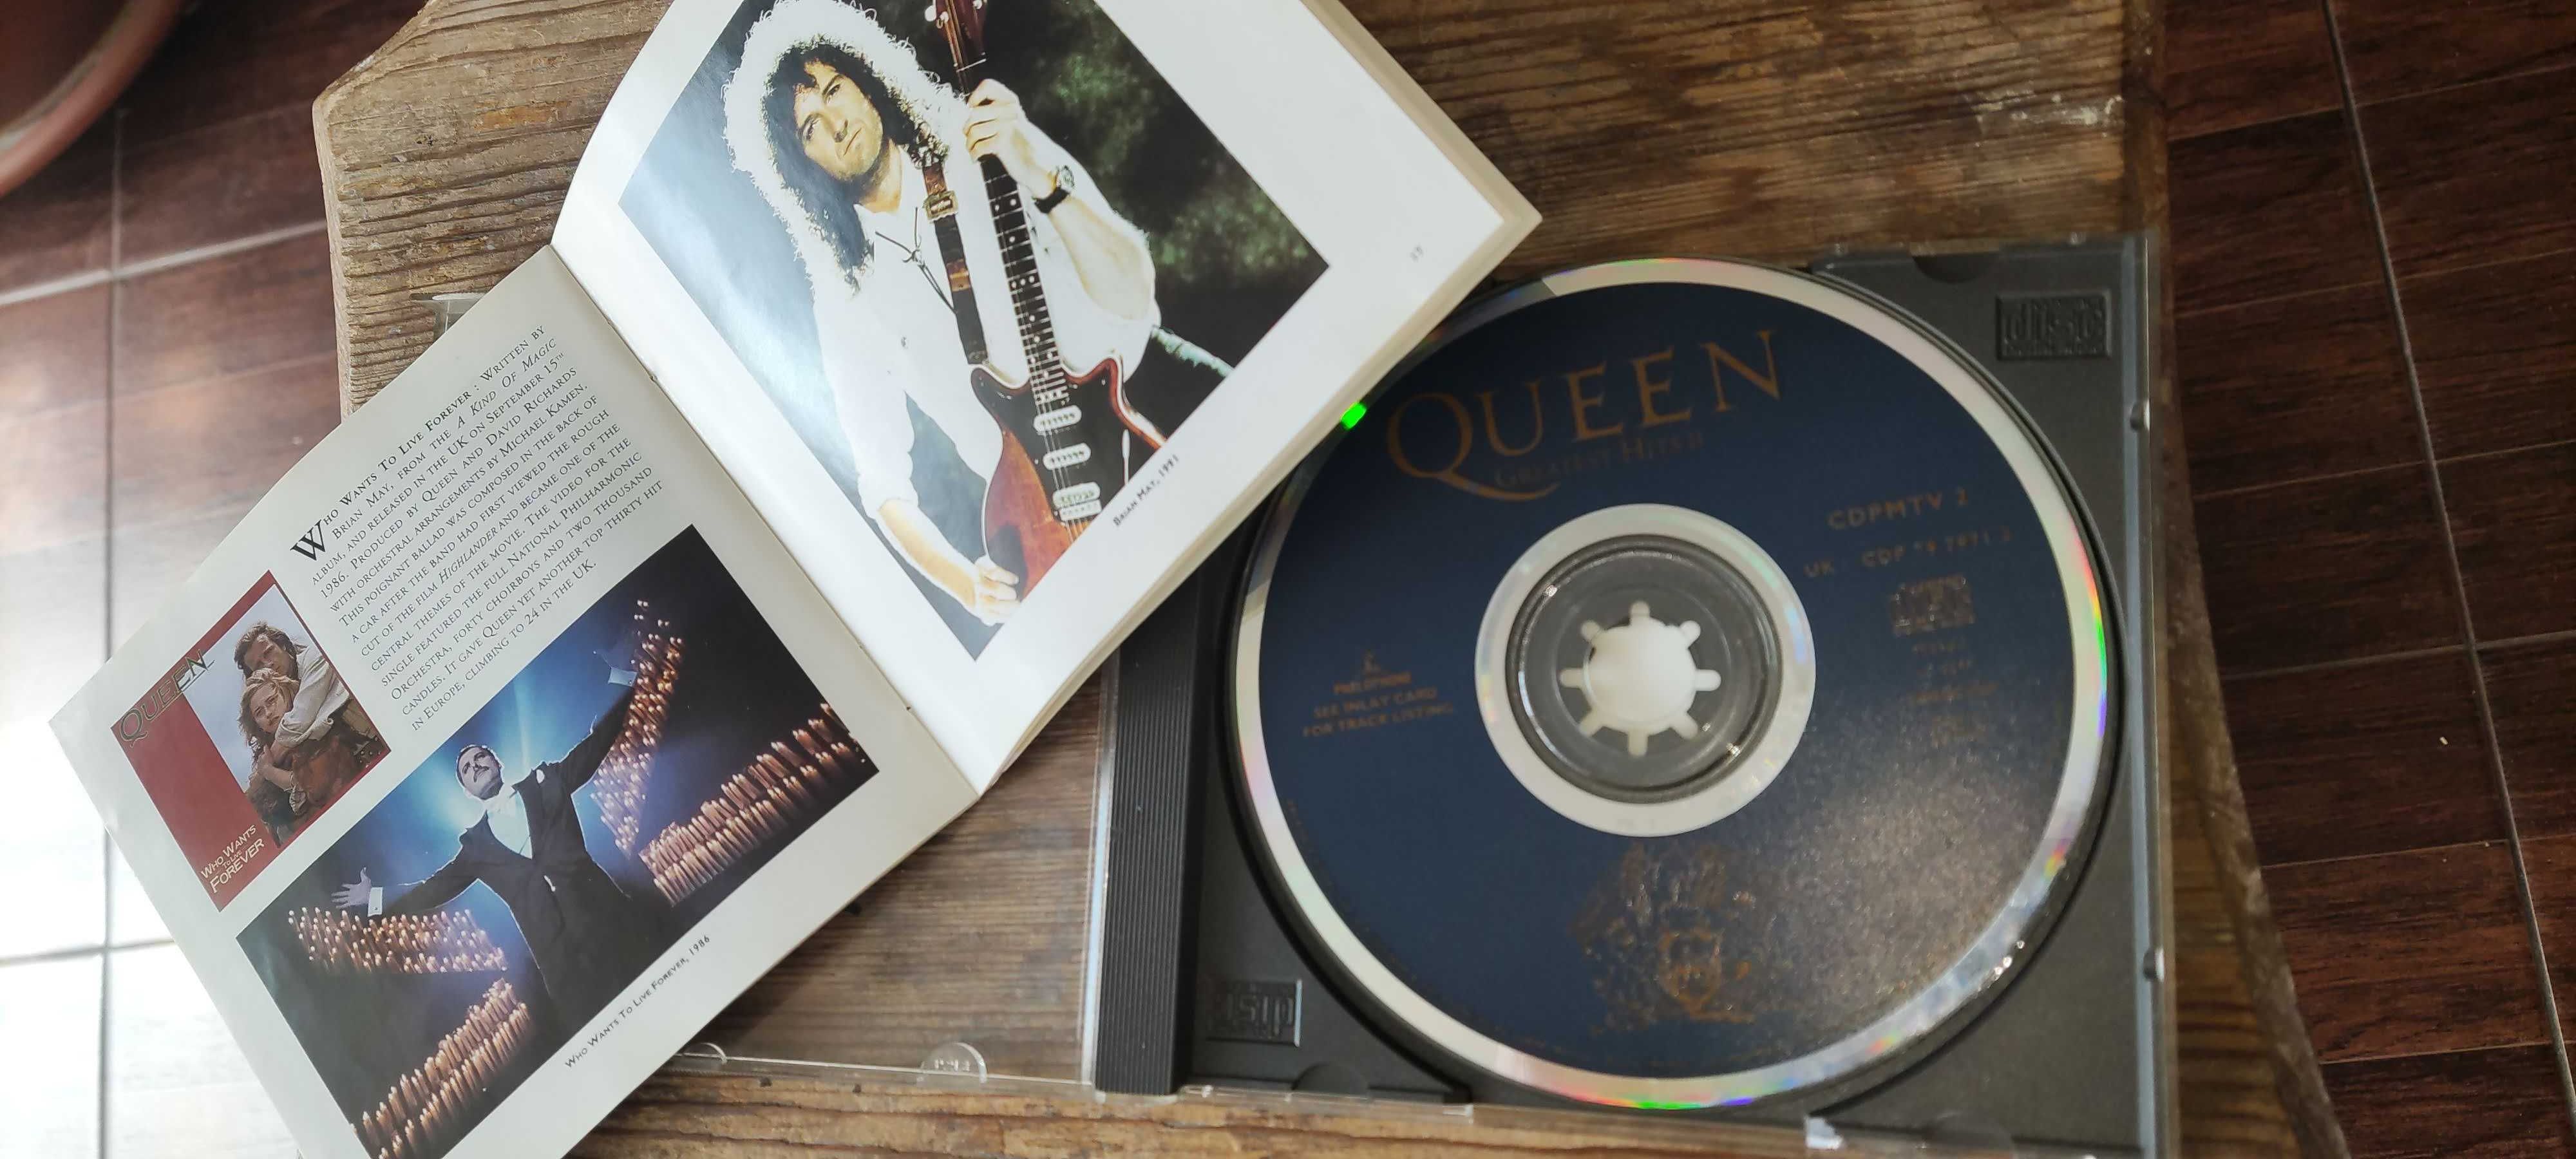 QUEEN The Greatest Hits II